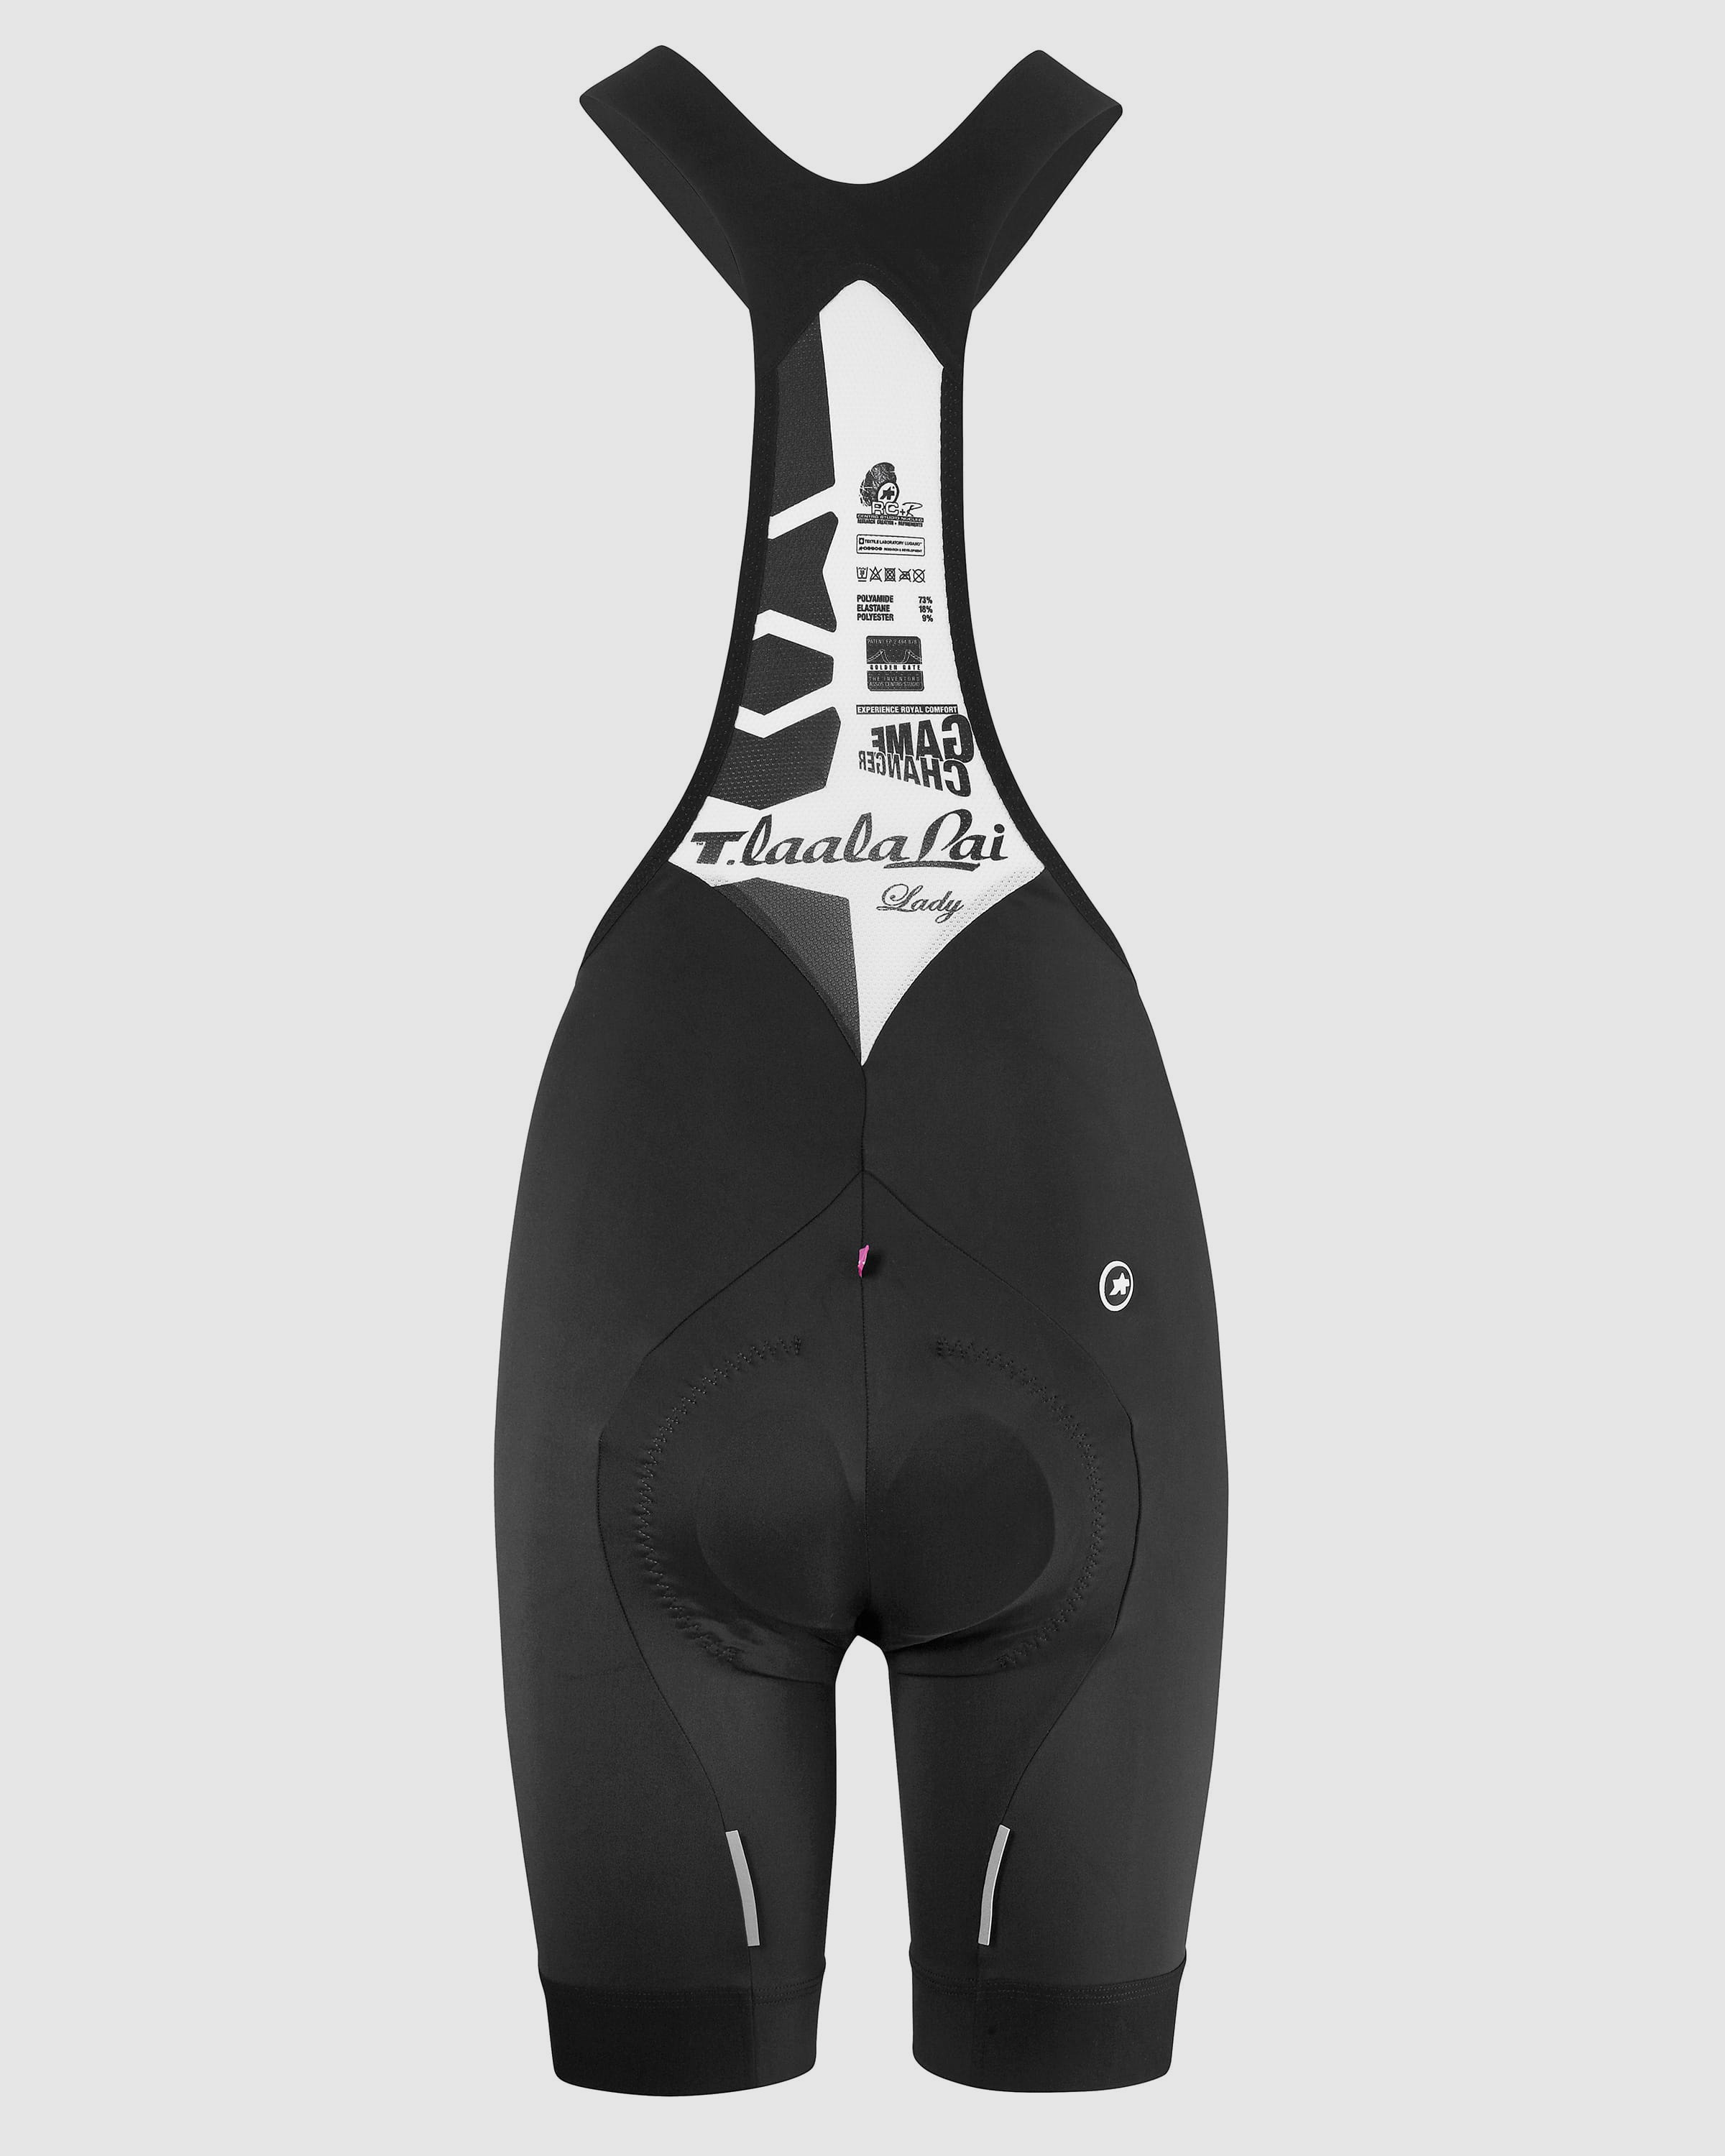 T.laalalaiShorts_s7 - ASSOS Of Switzerland - Official Outlet